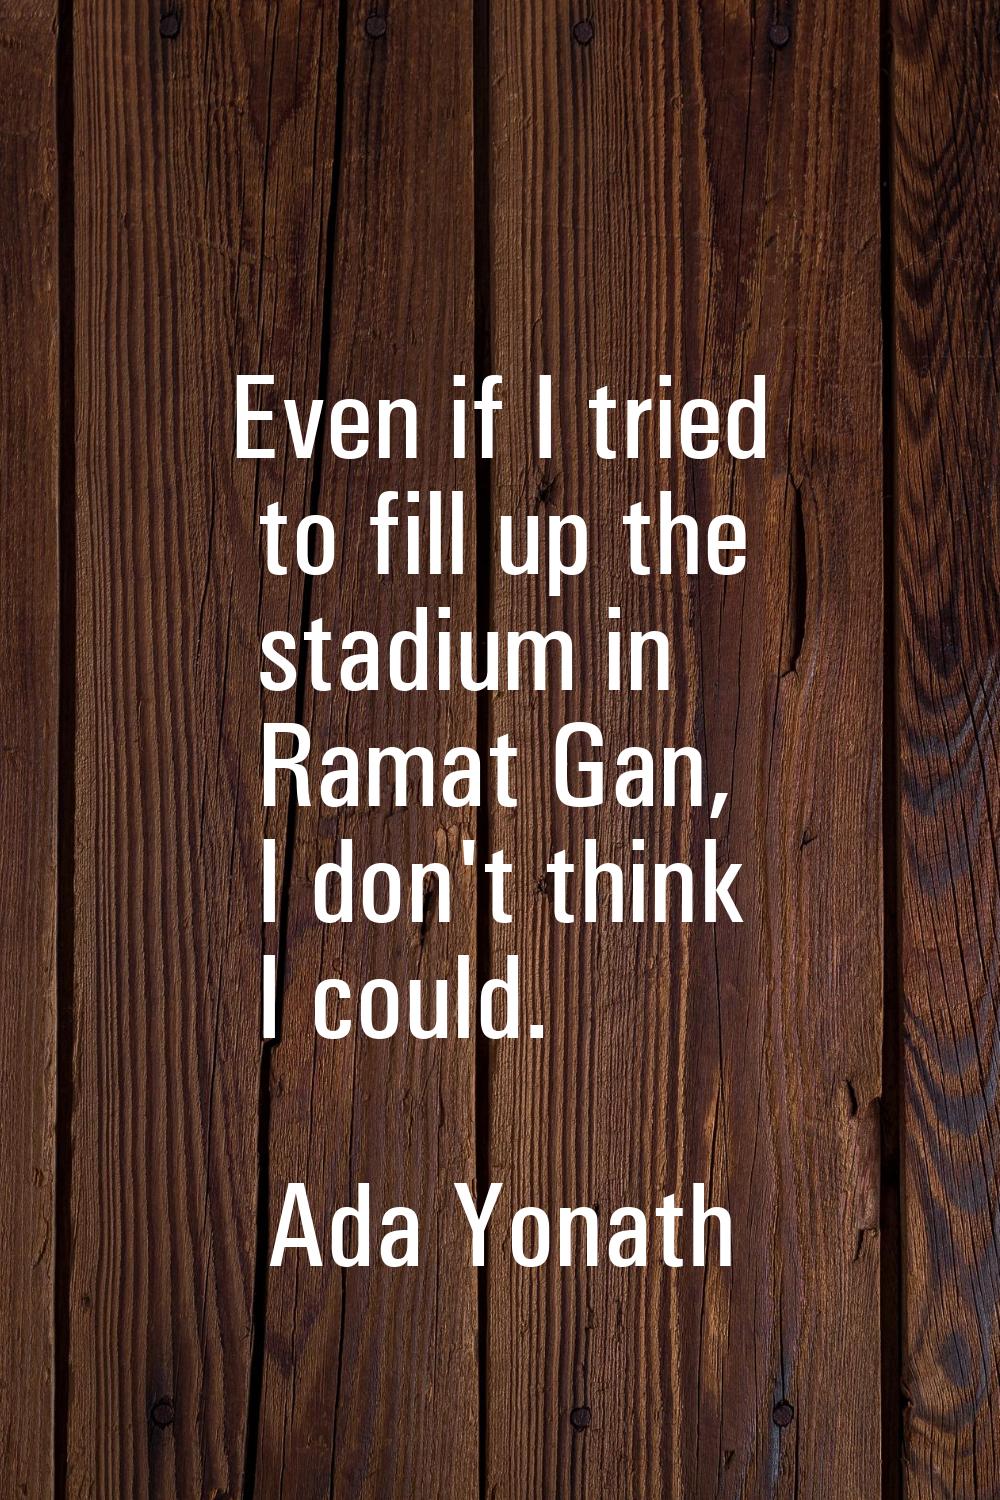 Even if I tried to fill up the stadium in Ramat Gan, I don't think I could.